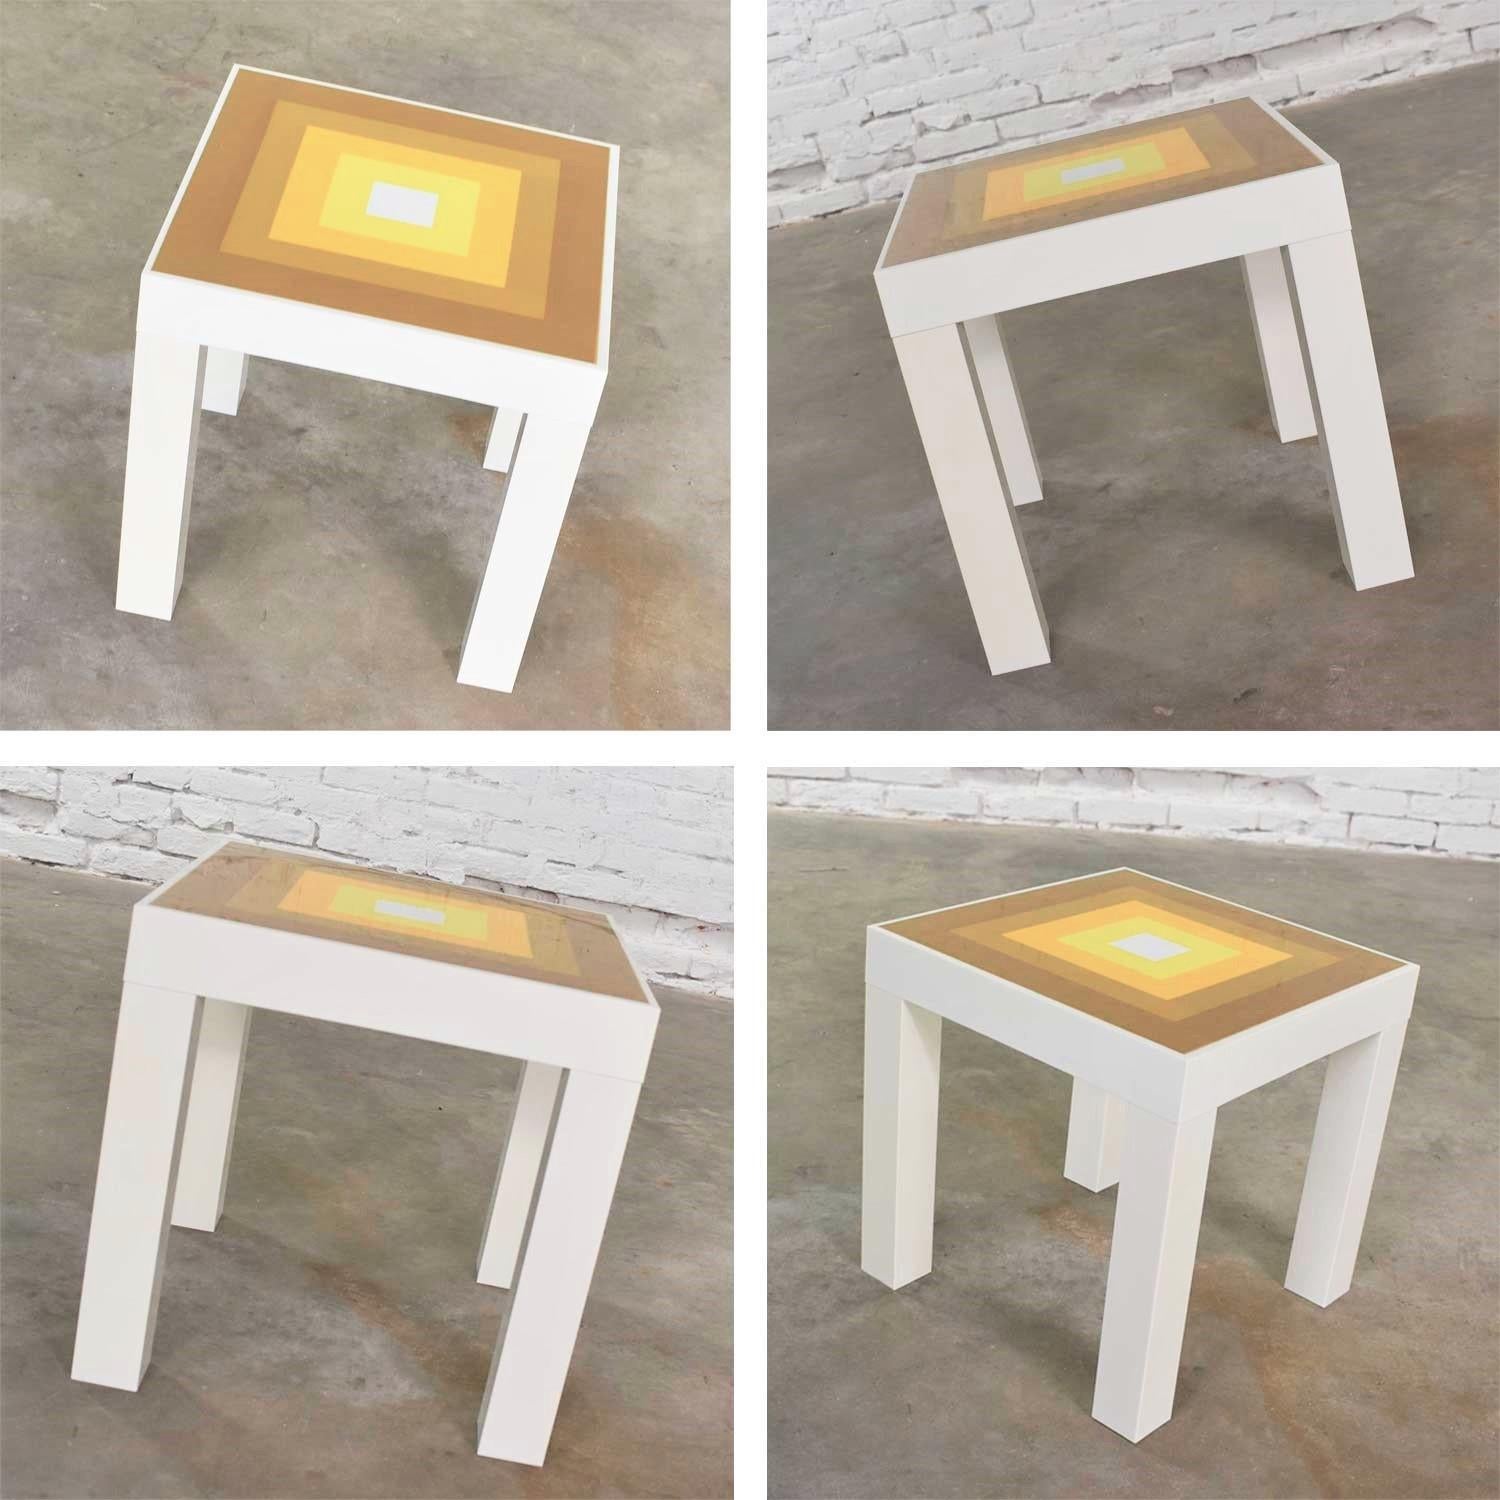 Trio Mod Pop Art Plastic Parsons Style Square Side Tables Style Kartell or Syroc For Sale 6